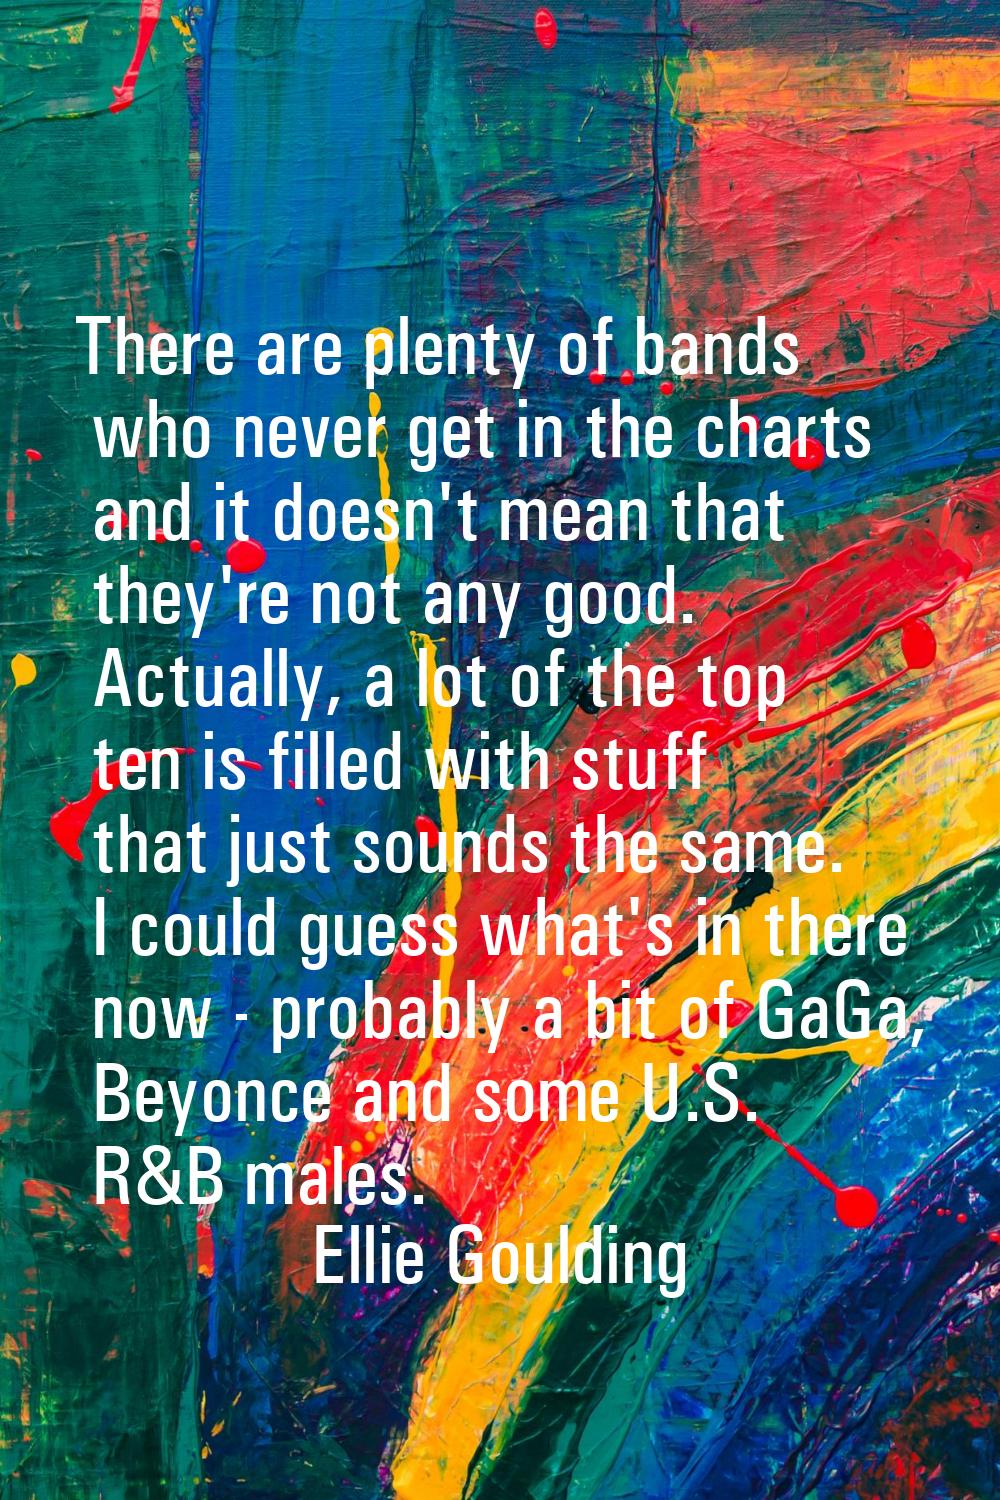 There are plenty of bands who never get in the charts and it doesn't mean that they're not any good